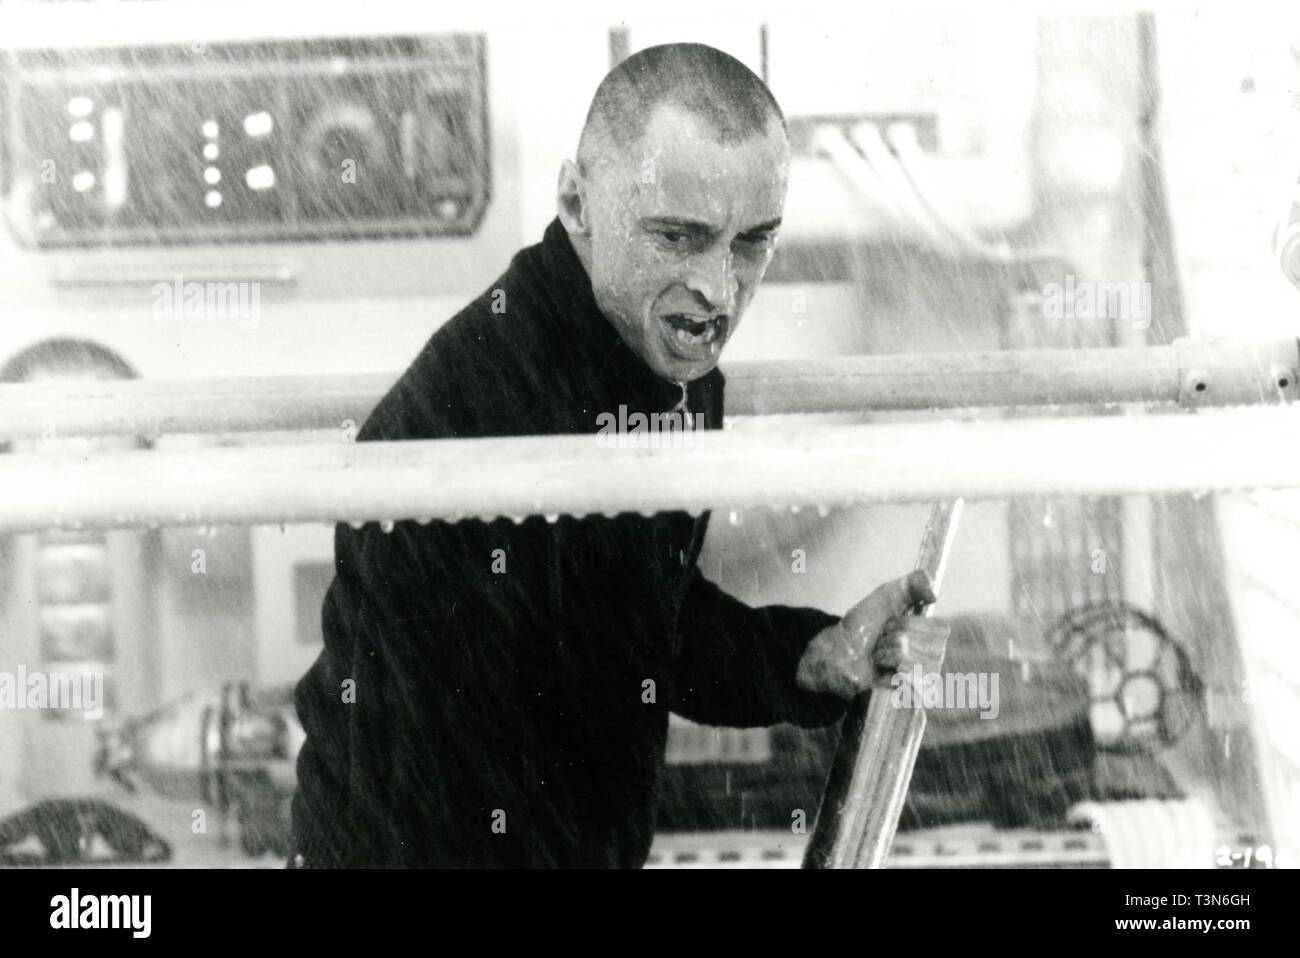 Robert Carlyle in a scene from the movie 007 - The World is Not Enough, 1999 Stock Photo